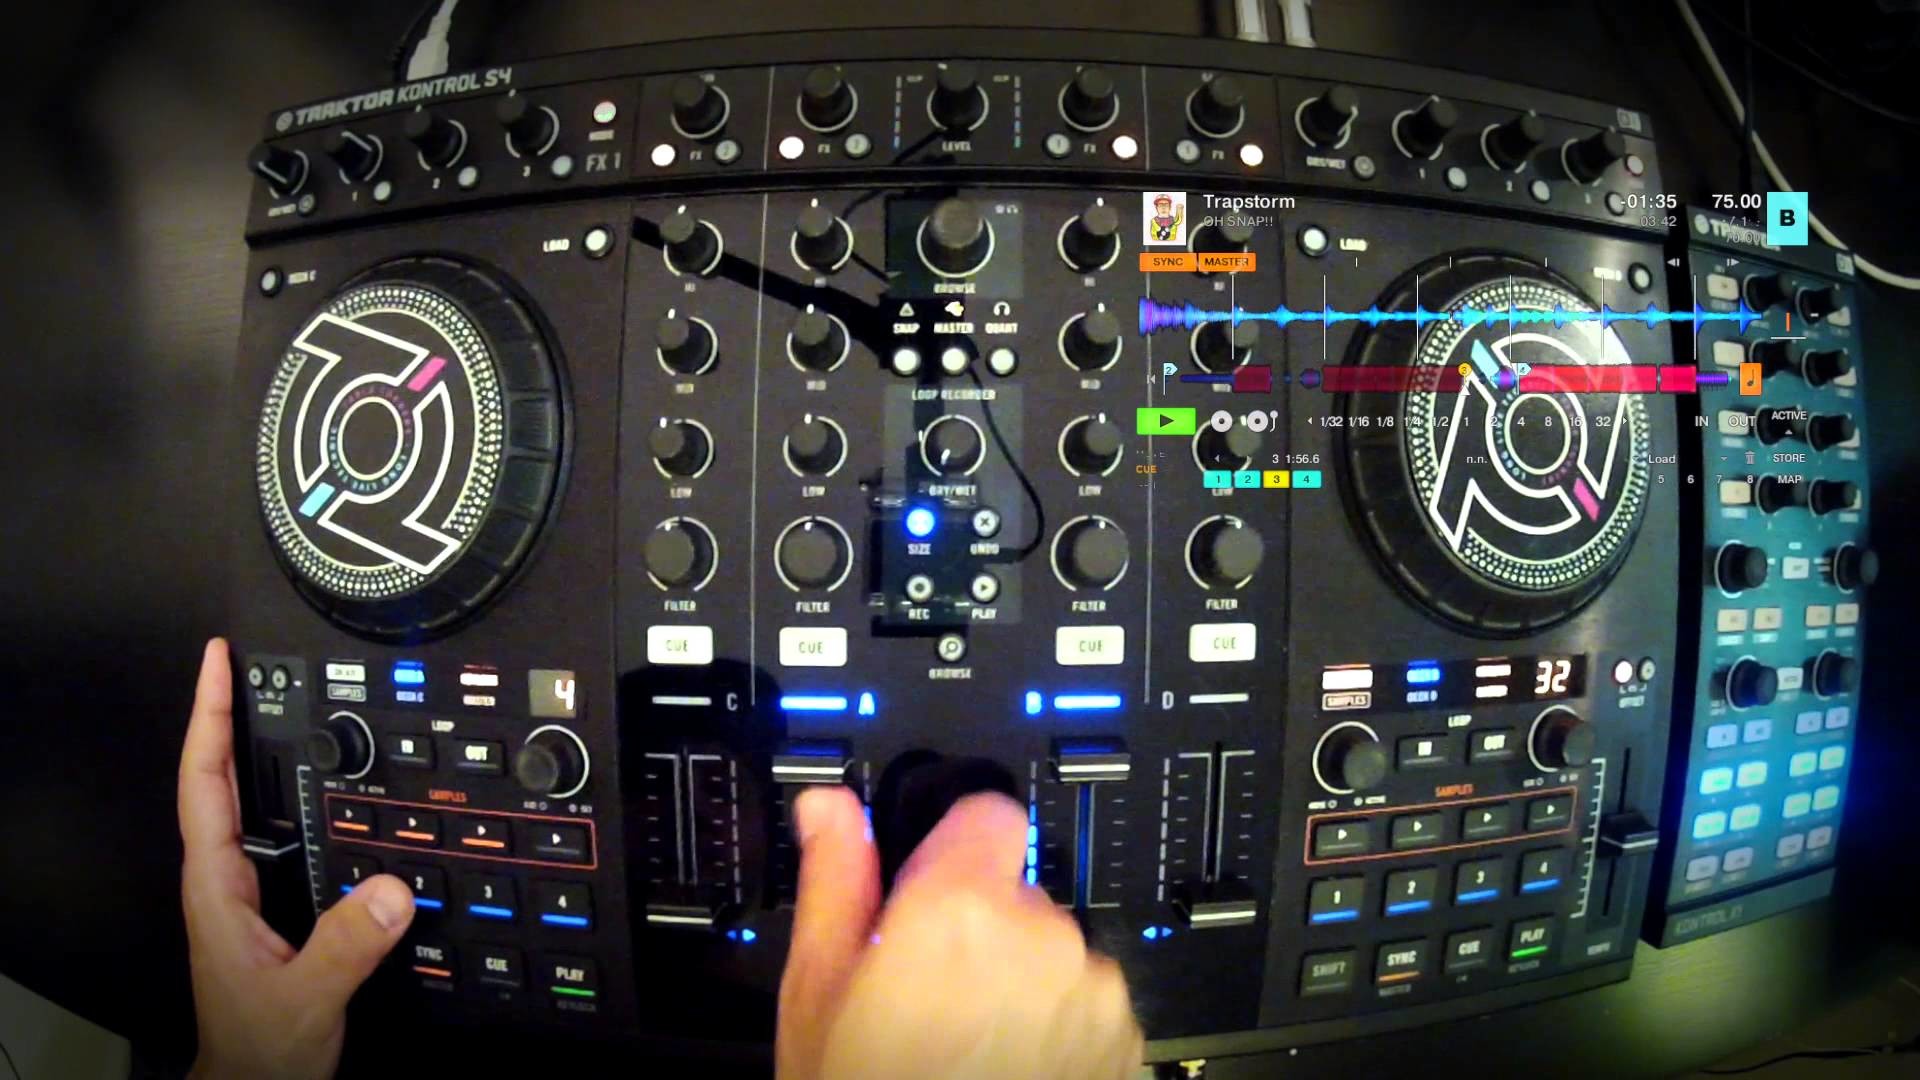 1920x1080 "Made for More Dubstep" Mini Mix - Traktor S4 & X1 Demo by @DJPromote -  YouTube